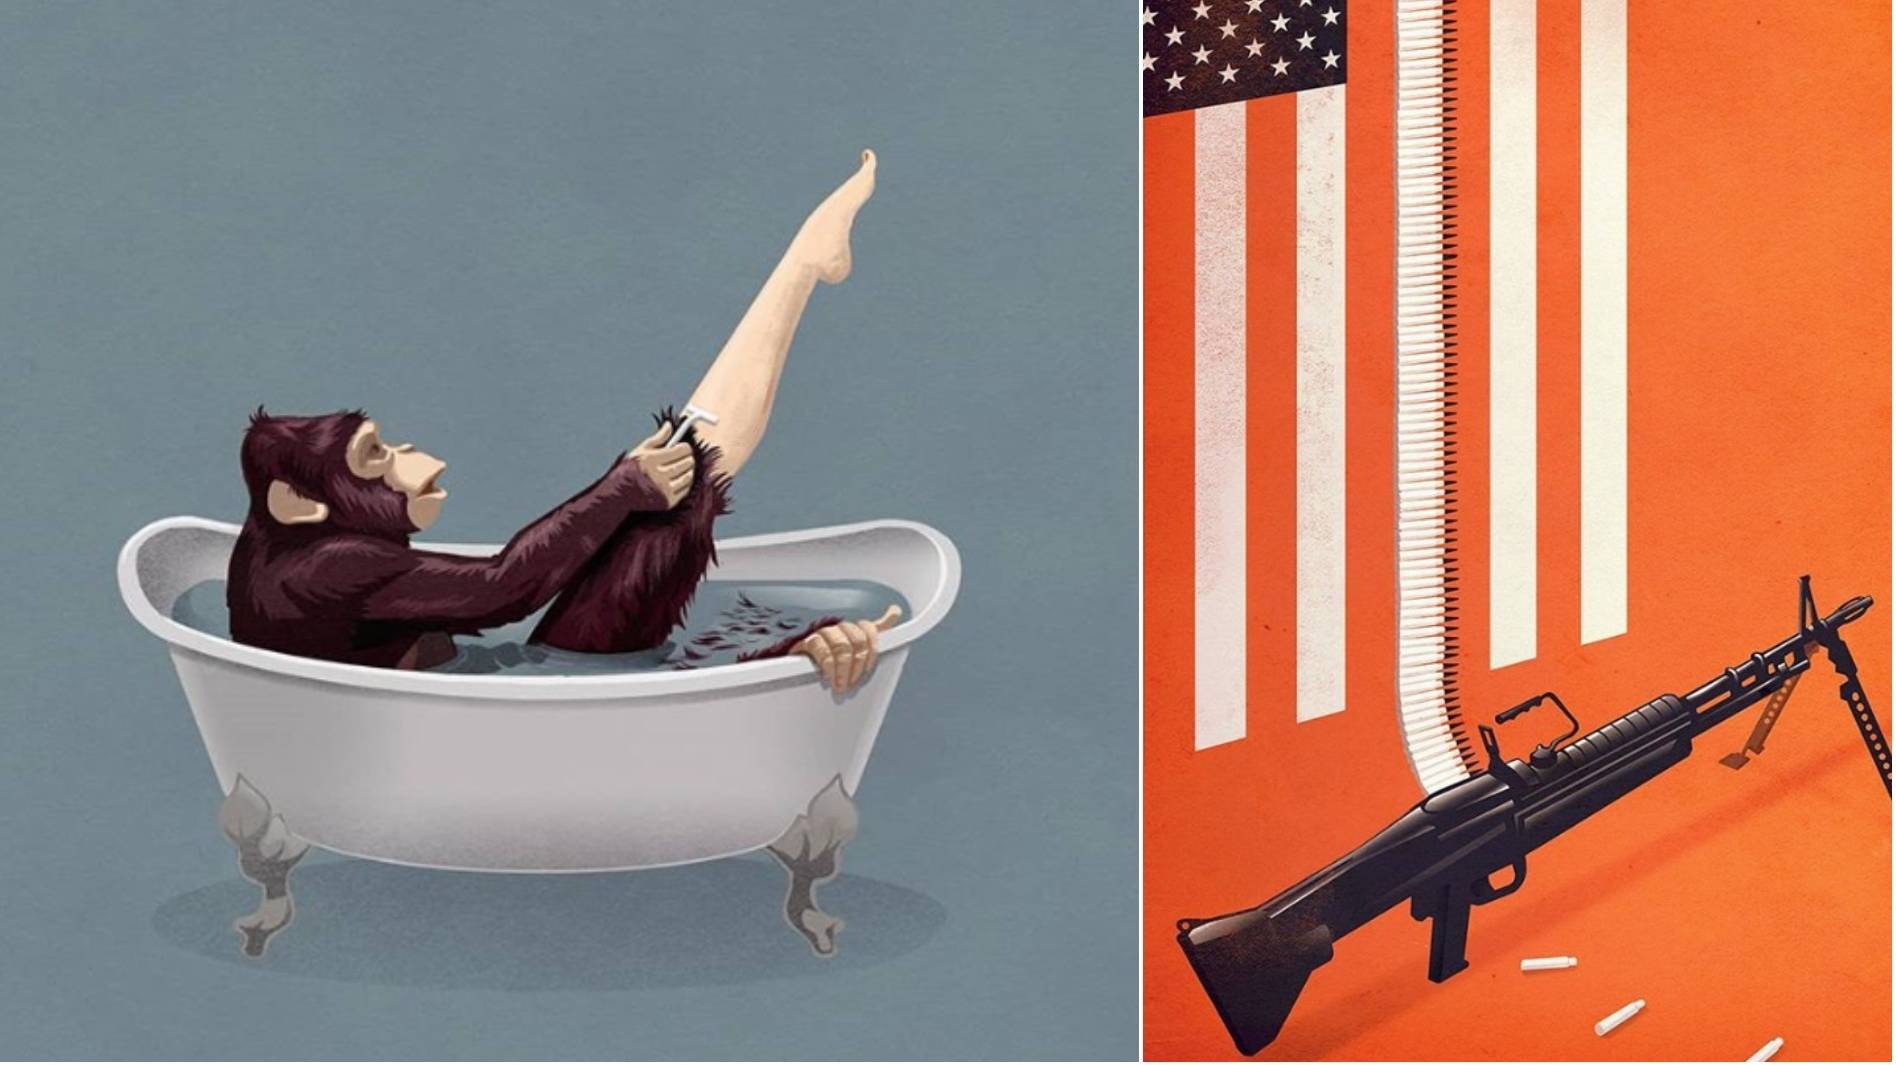 These illustrations show things in the world as they are